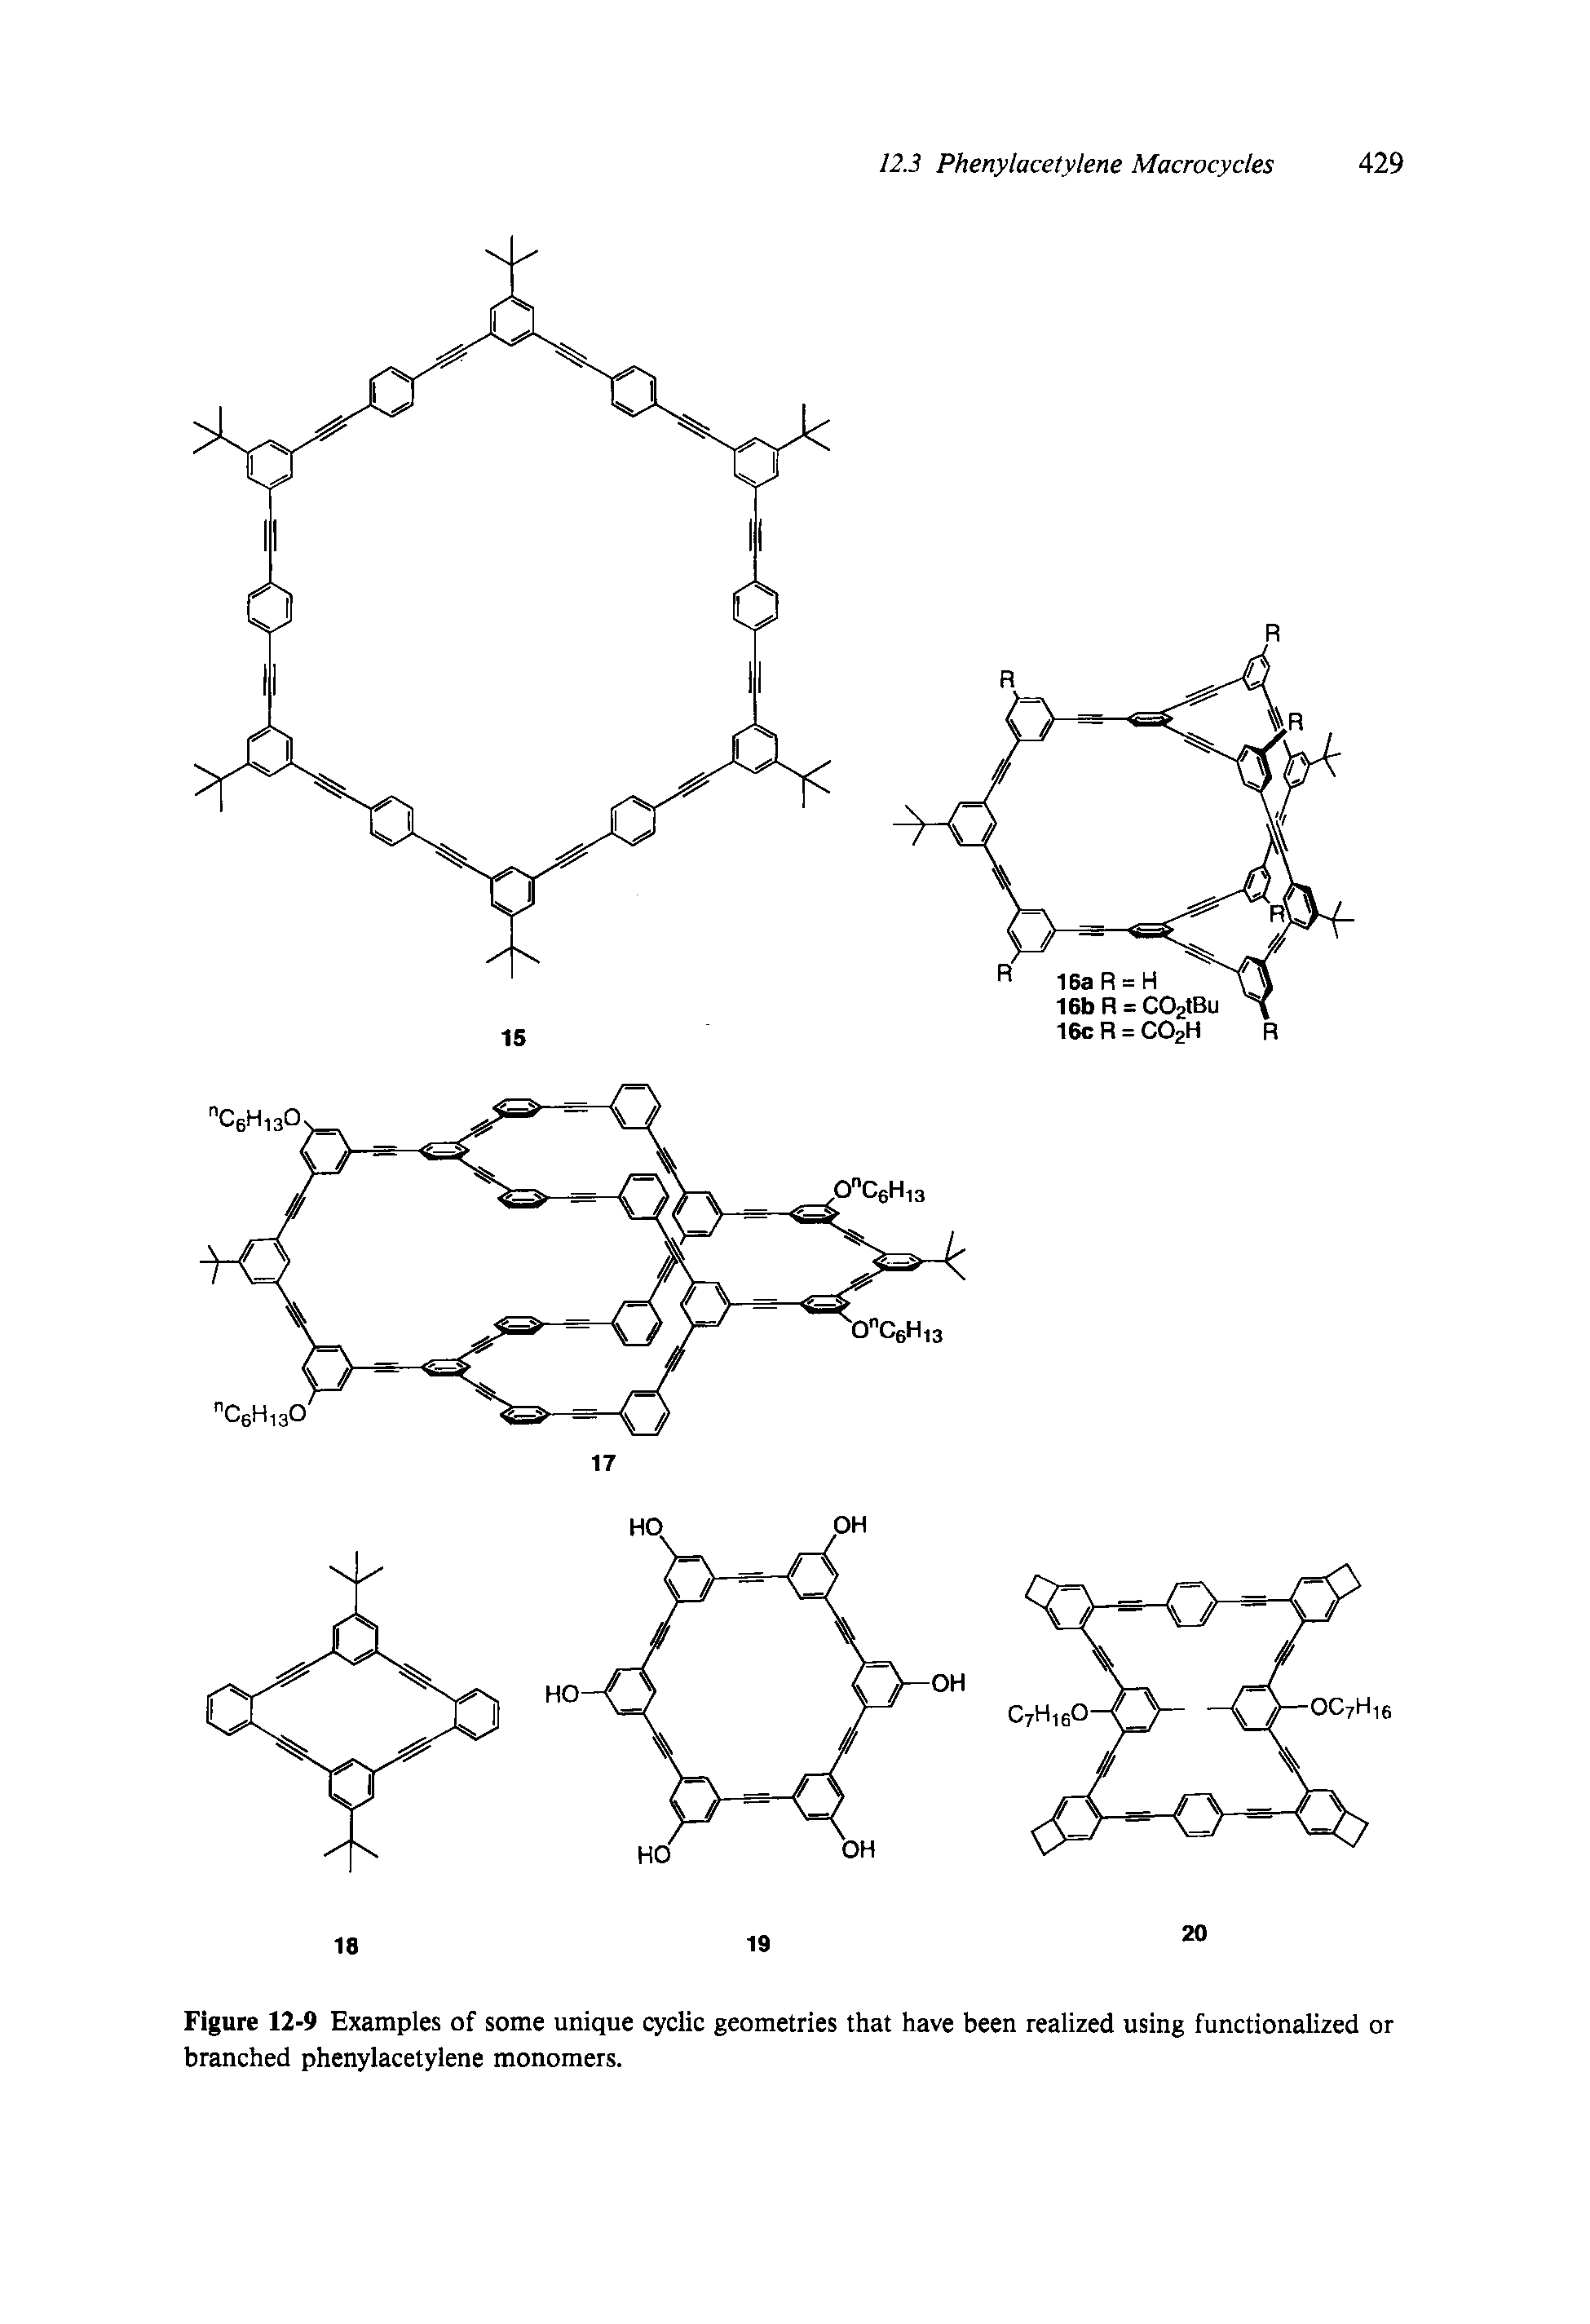 Figure 12-9 Examples of some unique cyclic geometries that have been realized using functionalized or branched phenylacetylene monomers.